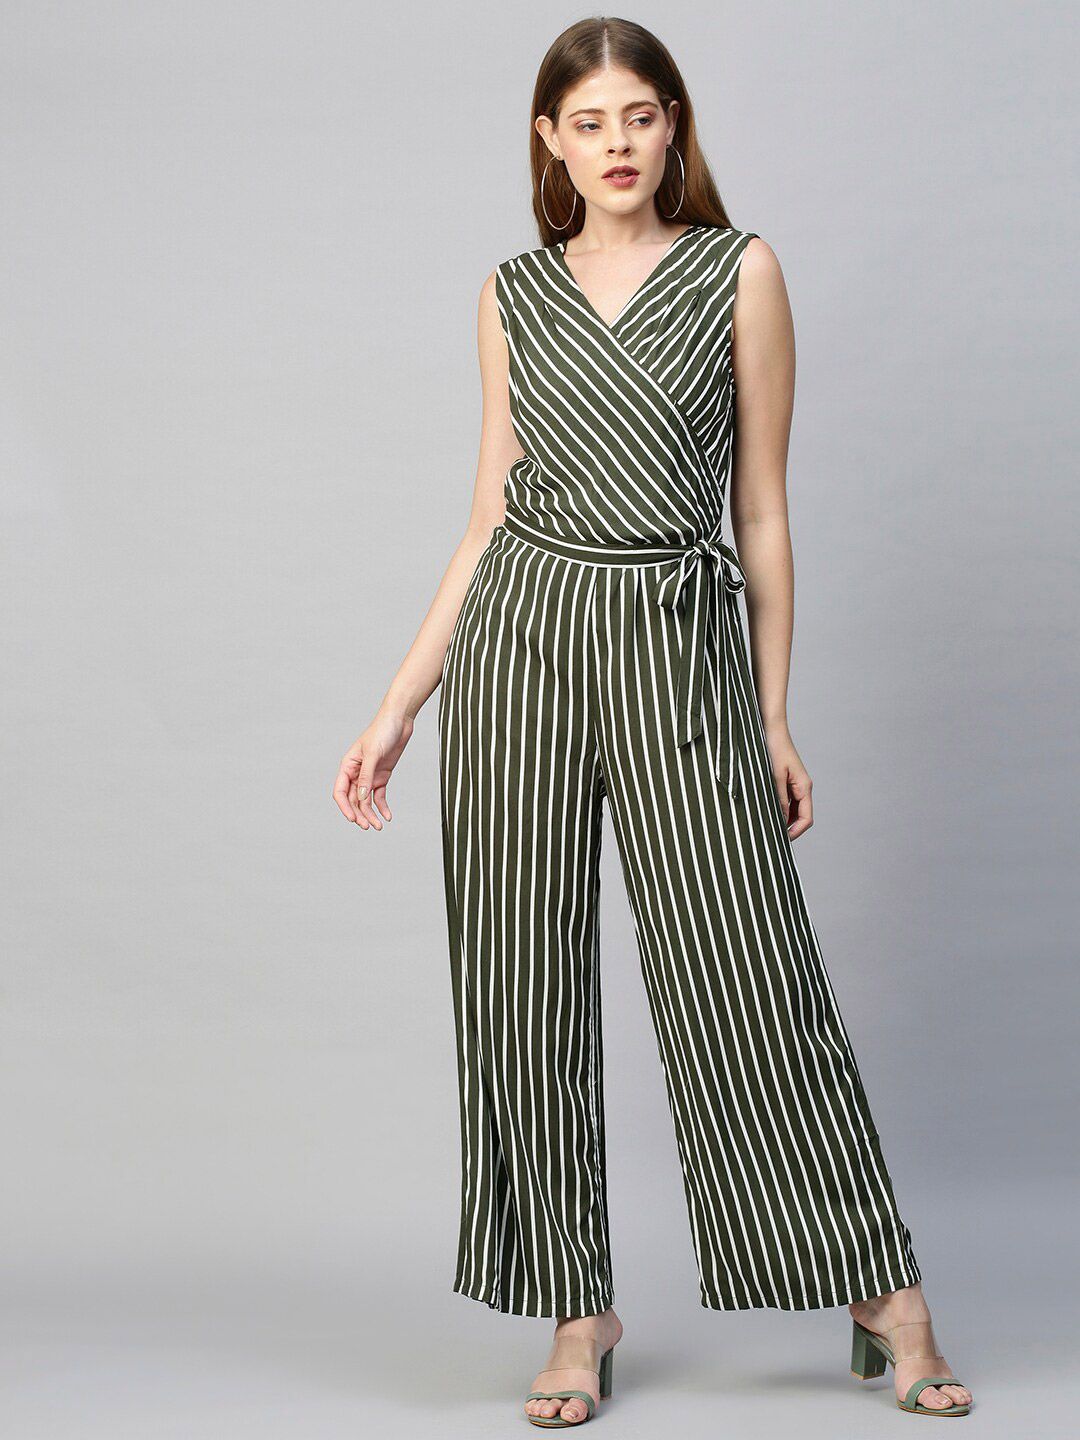 FASHOR Green & White Striped Basic Jumpsuit Price in India